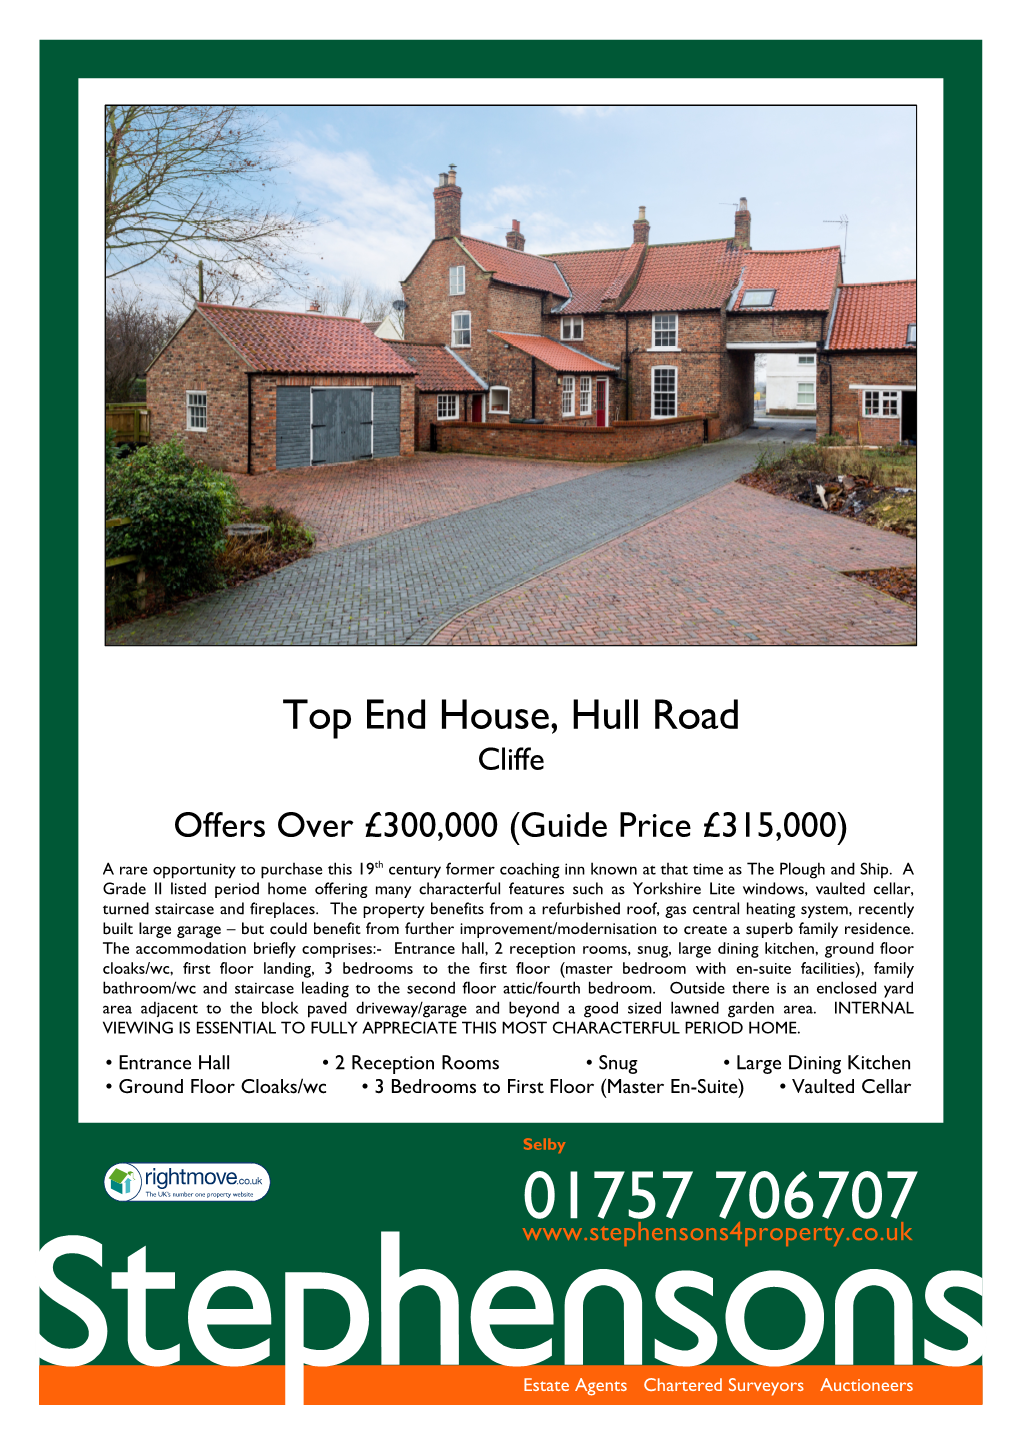 Top End House, Hull Road Cliffe Offers Over £300,000 (Guide Price £315,000)